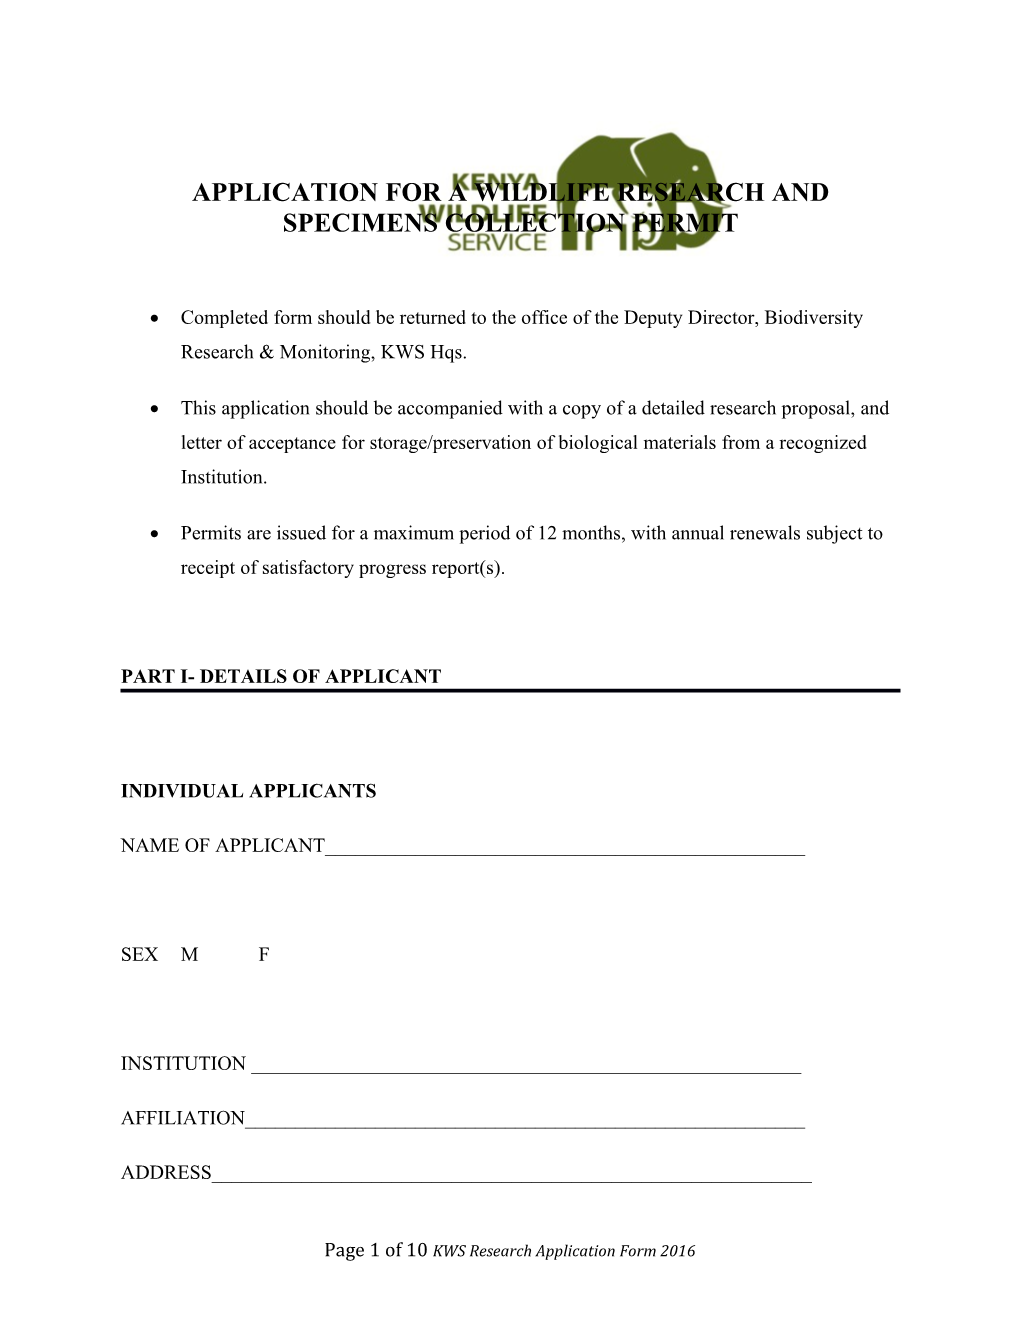 Application Form for Wildlife Research